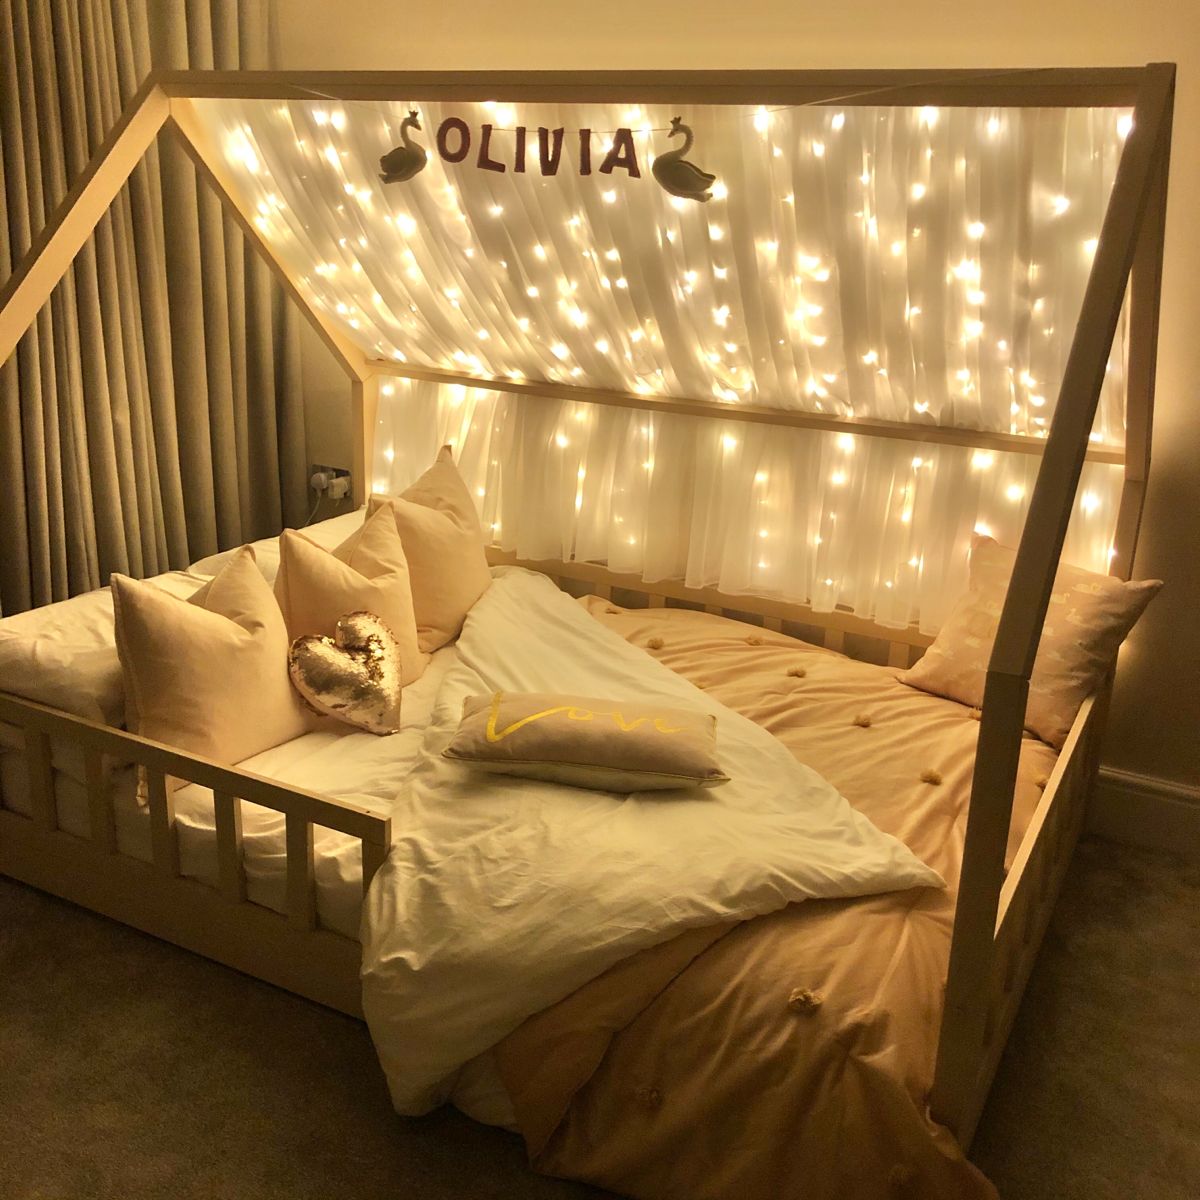 Toddler Comfort: Transform Your Space with Toddler Bed Designs